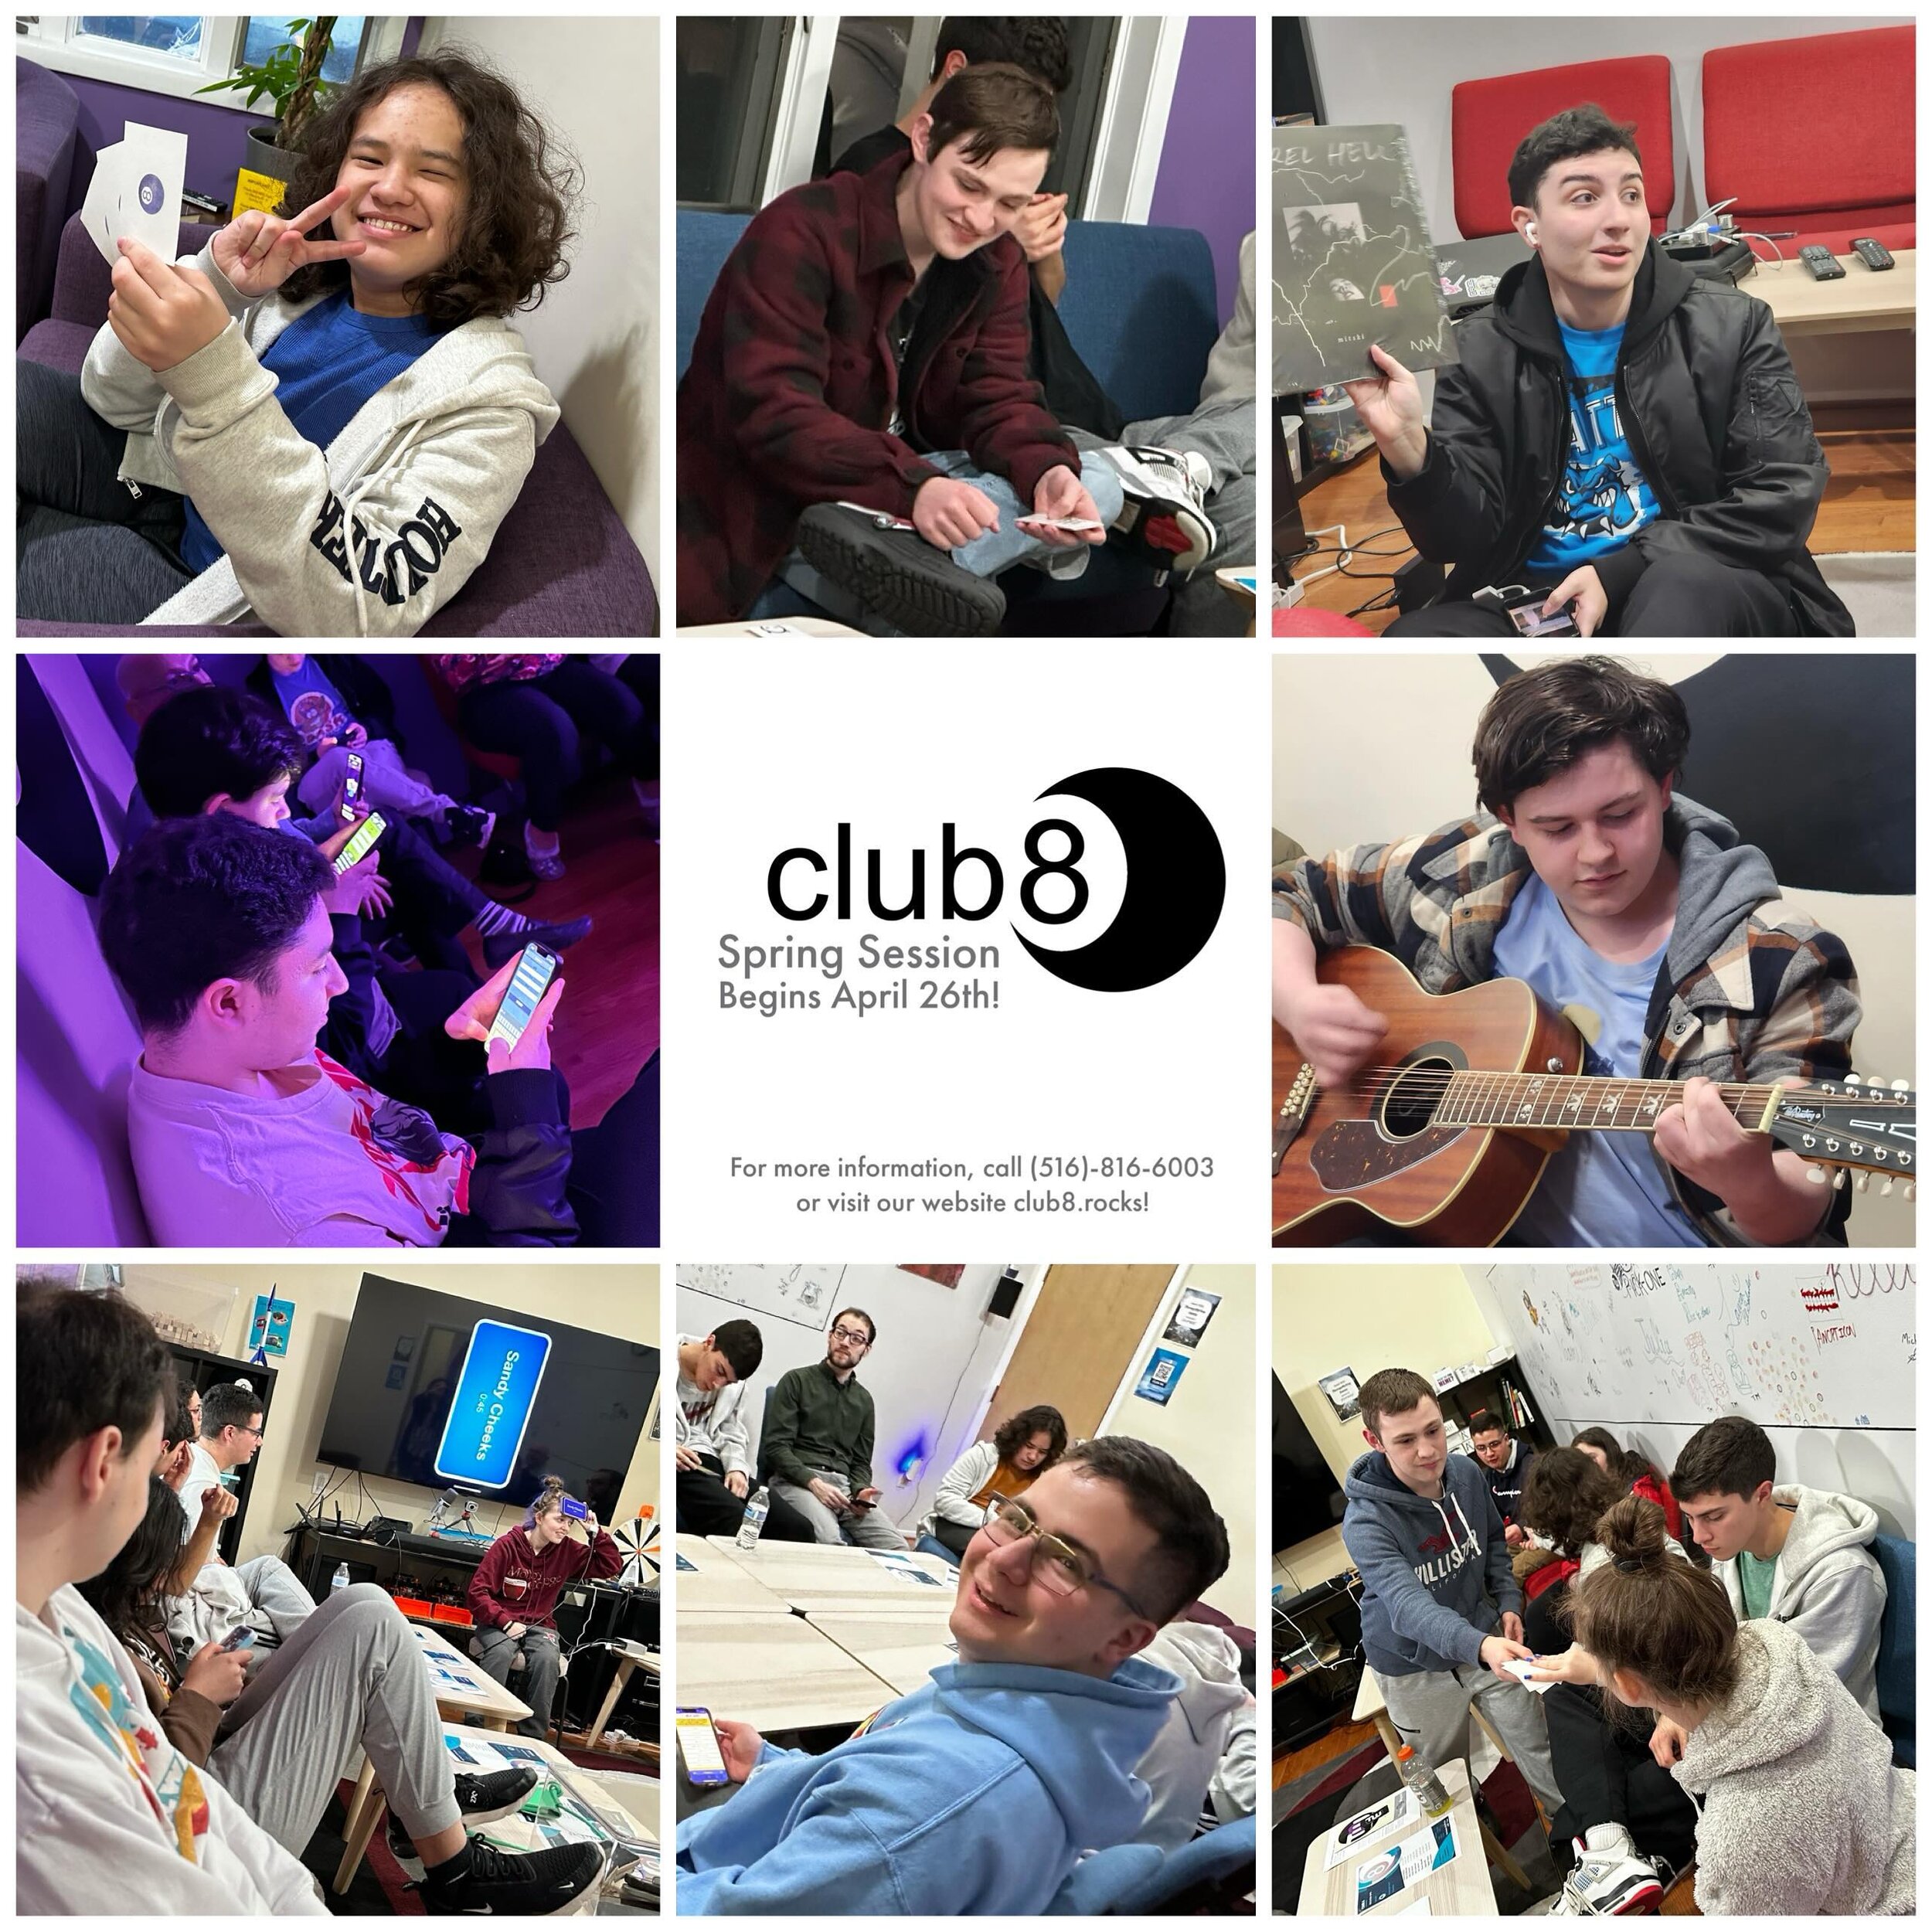 Club 8&rsquo;s Spring Session will begin on Friday, April 26th! Slots are still available! 🌸 For more information about Club 8, give us a call at (516)-816-6003 or visit our website at club8.rocks! 🎱📞